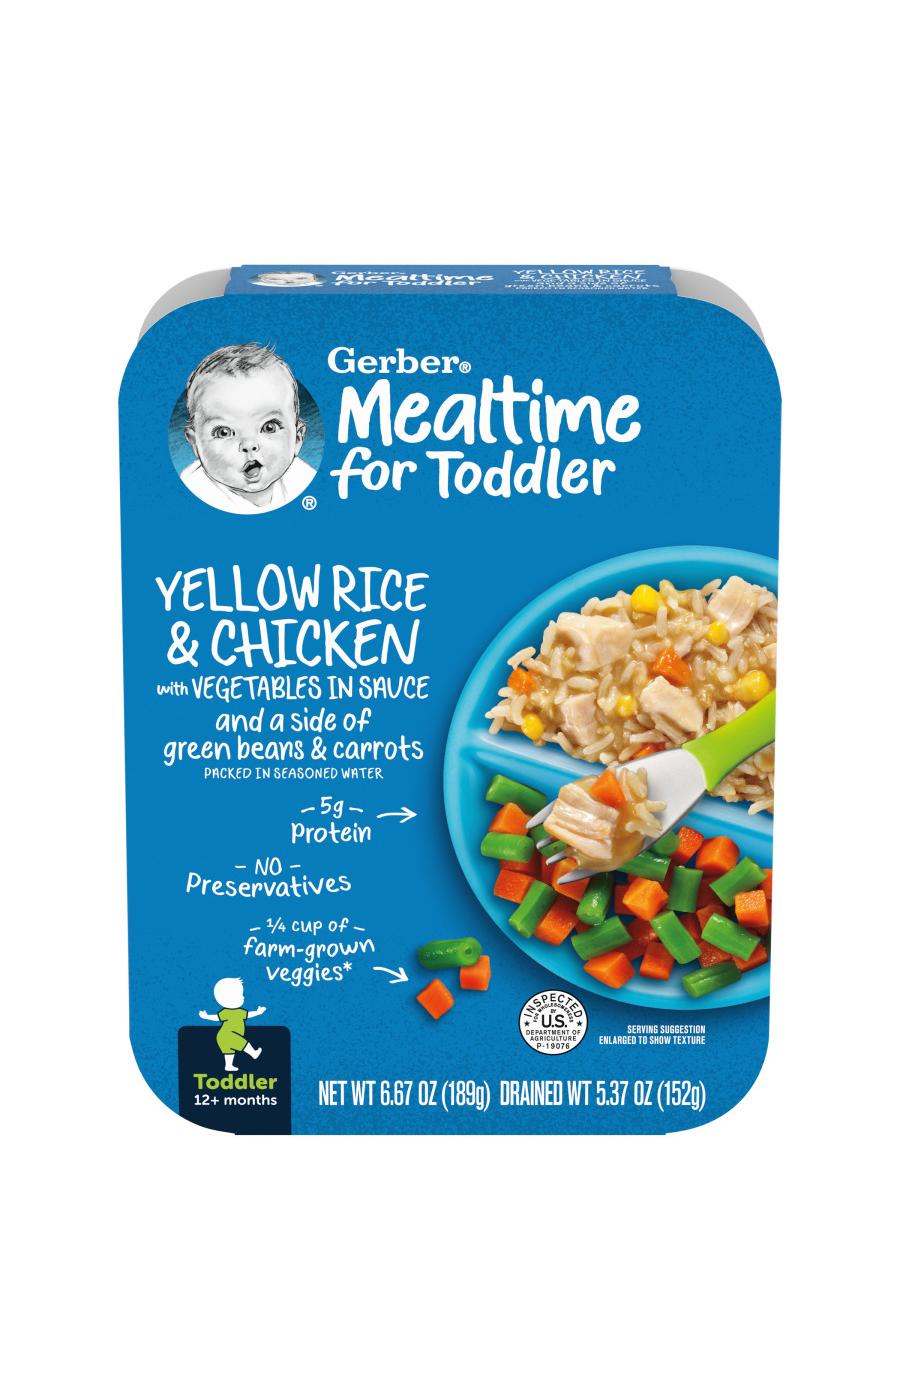 Gerber Mealtime for Toddler - Yellow Rice & Chicken with Vegetables in Sauce; image 1 of 8